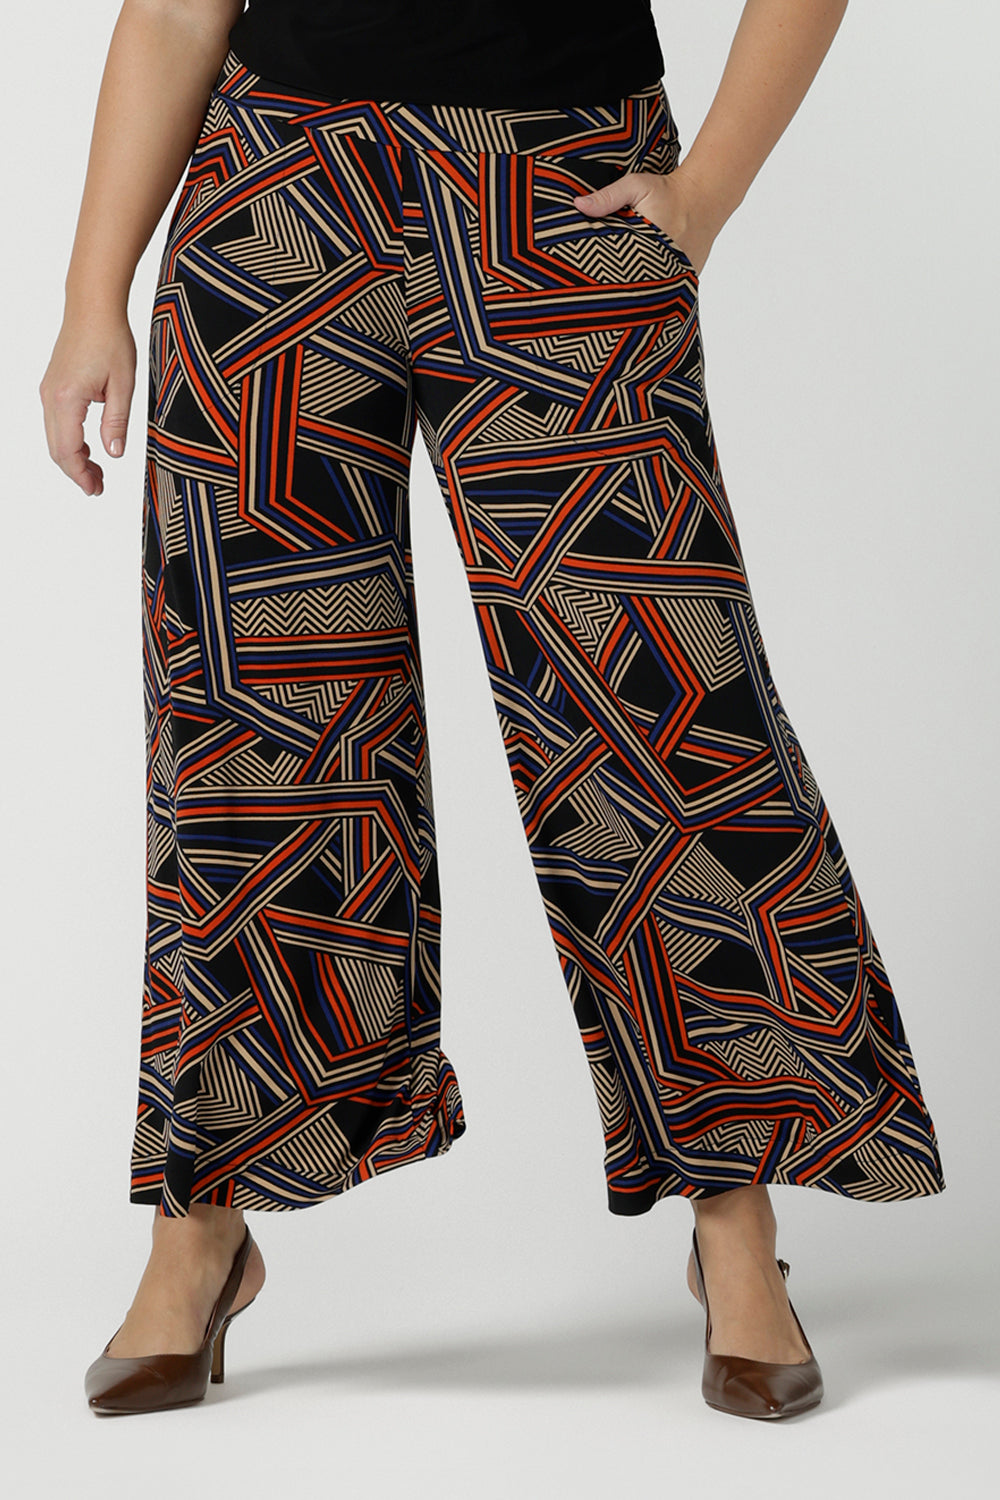 Front view of a size 10 woman wearing the Dany Culotte in Trixie, a printed Jersey work pant with a geometric pattern. Wide leg with functional pockets and wide waistband. Cropped length and petite height friendly. Made in Australia for women size 8 - 24.